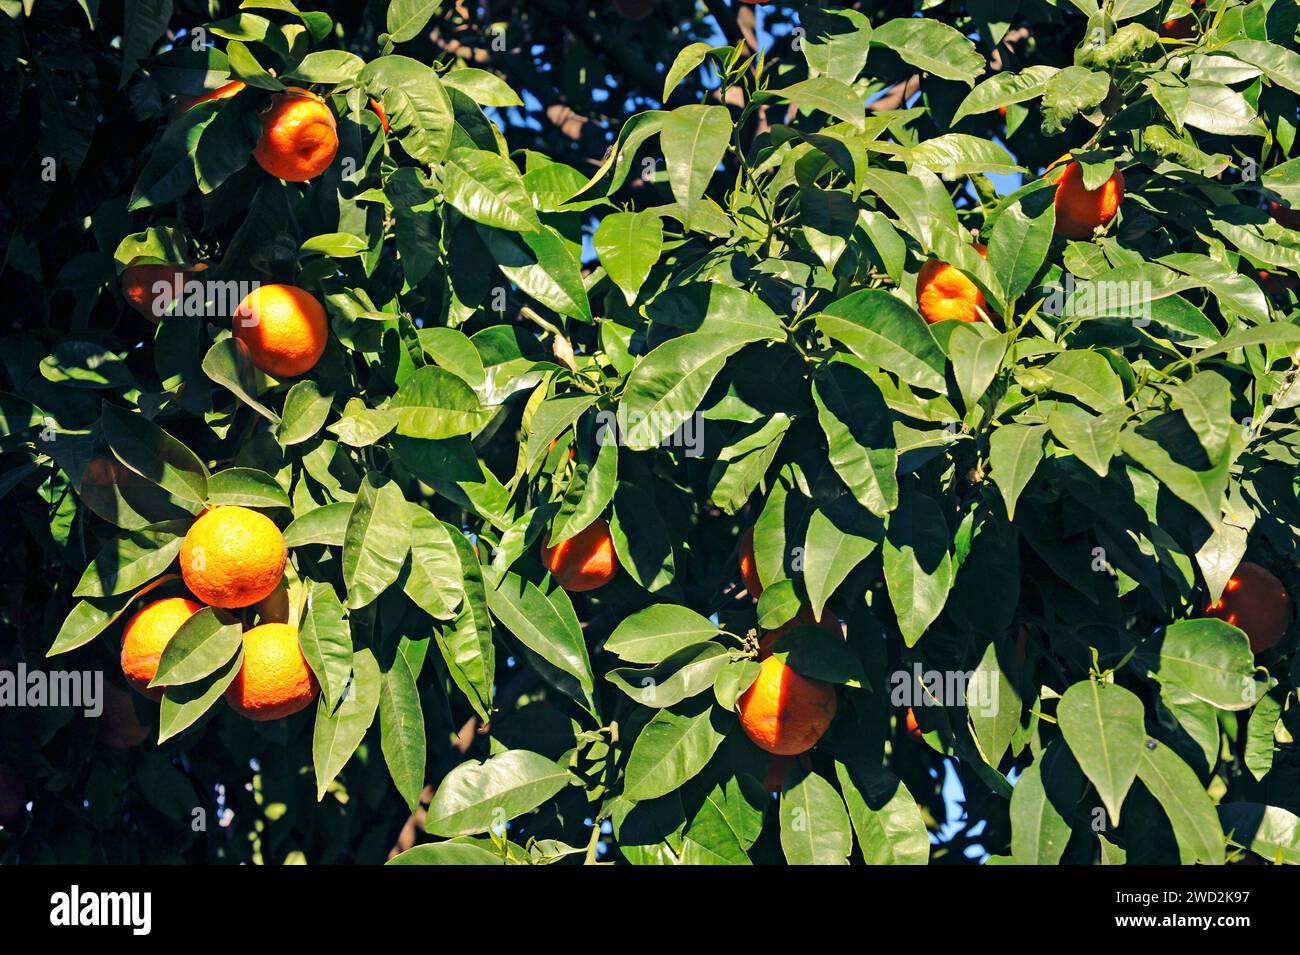 Mandarin orange (Citrus reticulata clementina) is a small tree native to south China. Its fruits (mandarines) are edible. Fruits and leaves detail. Stock Photo